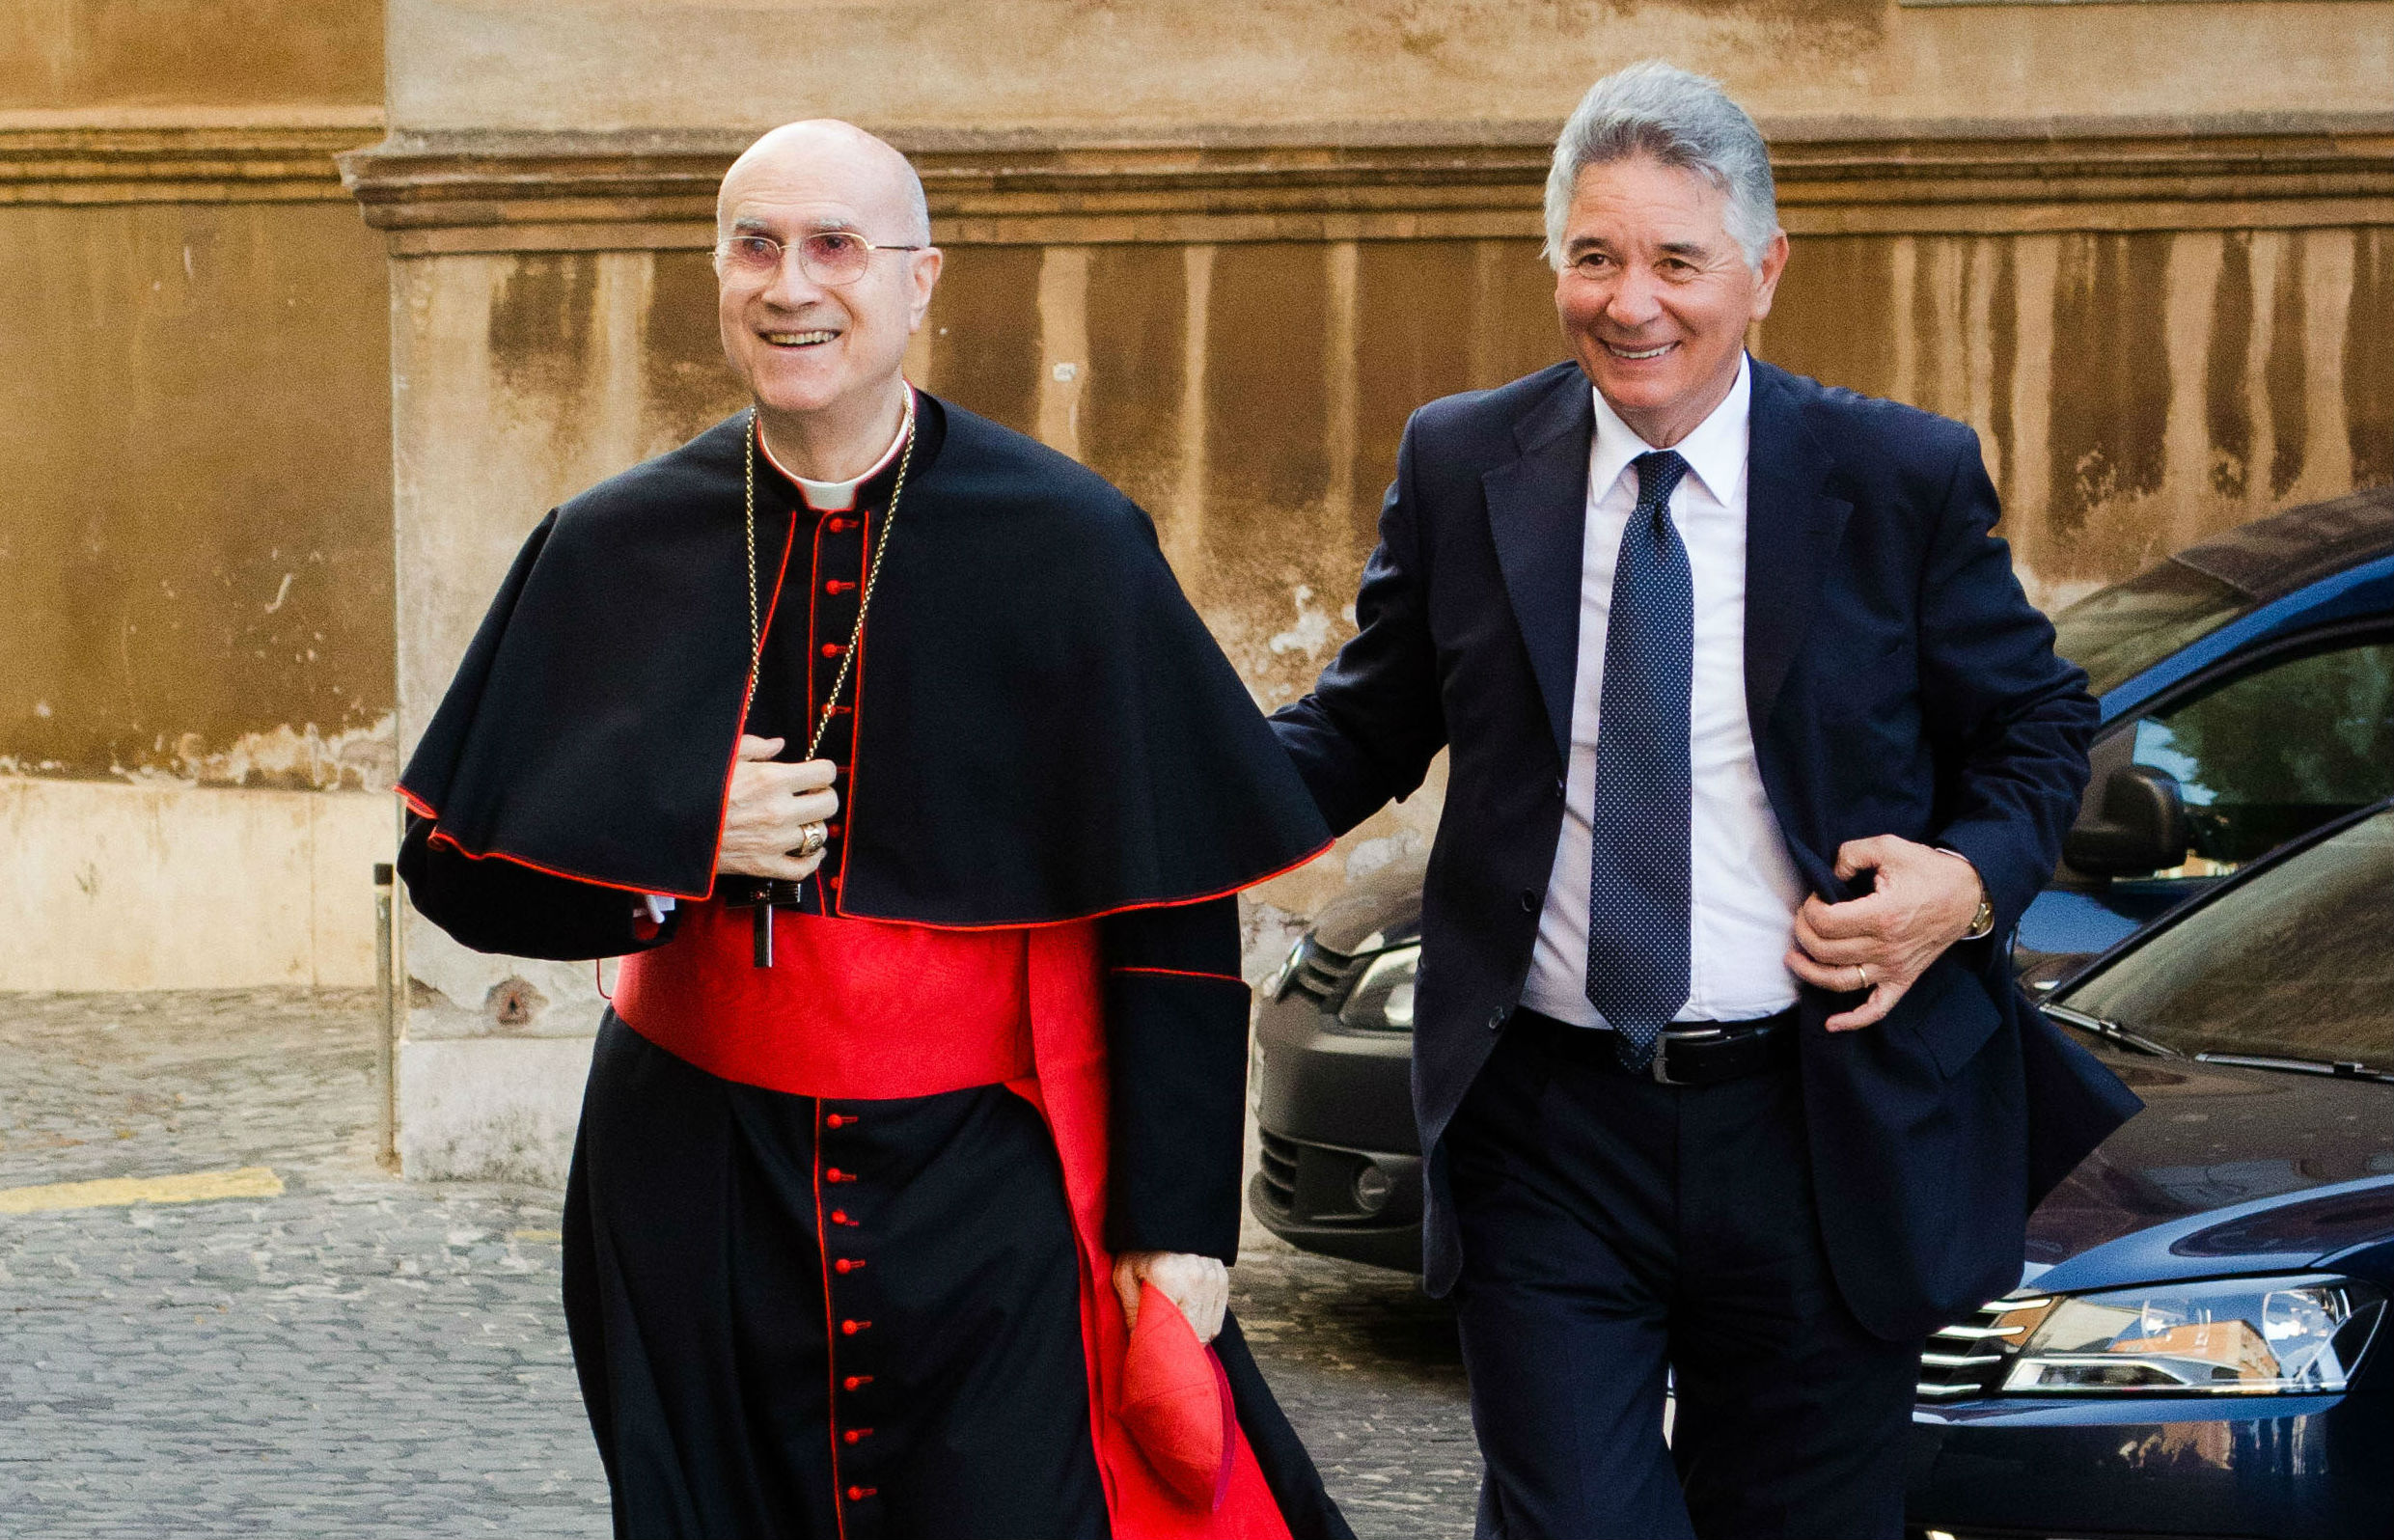 Cardinal Bertone risks becoming embroiled in trial claiming embezzled hospital funds used to refurbish his home   